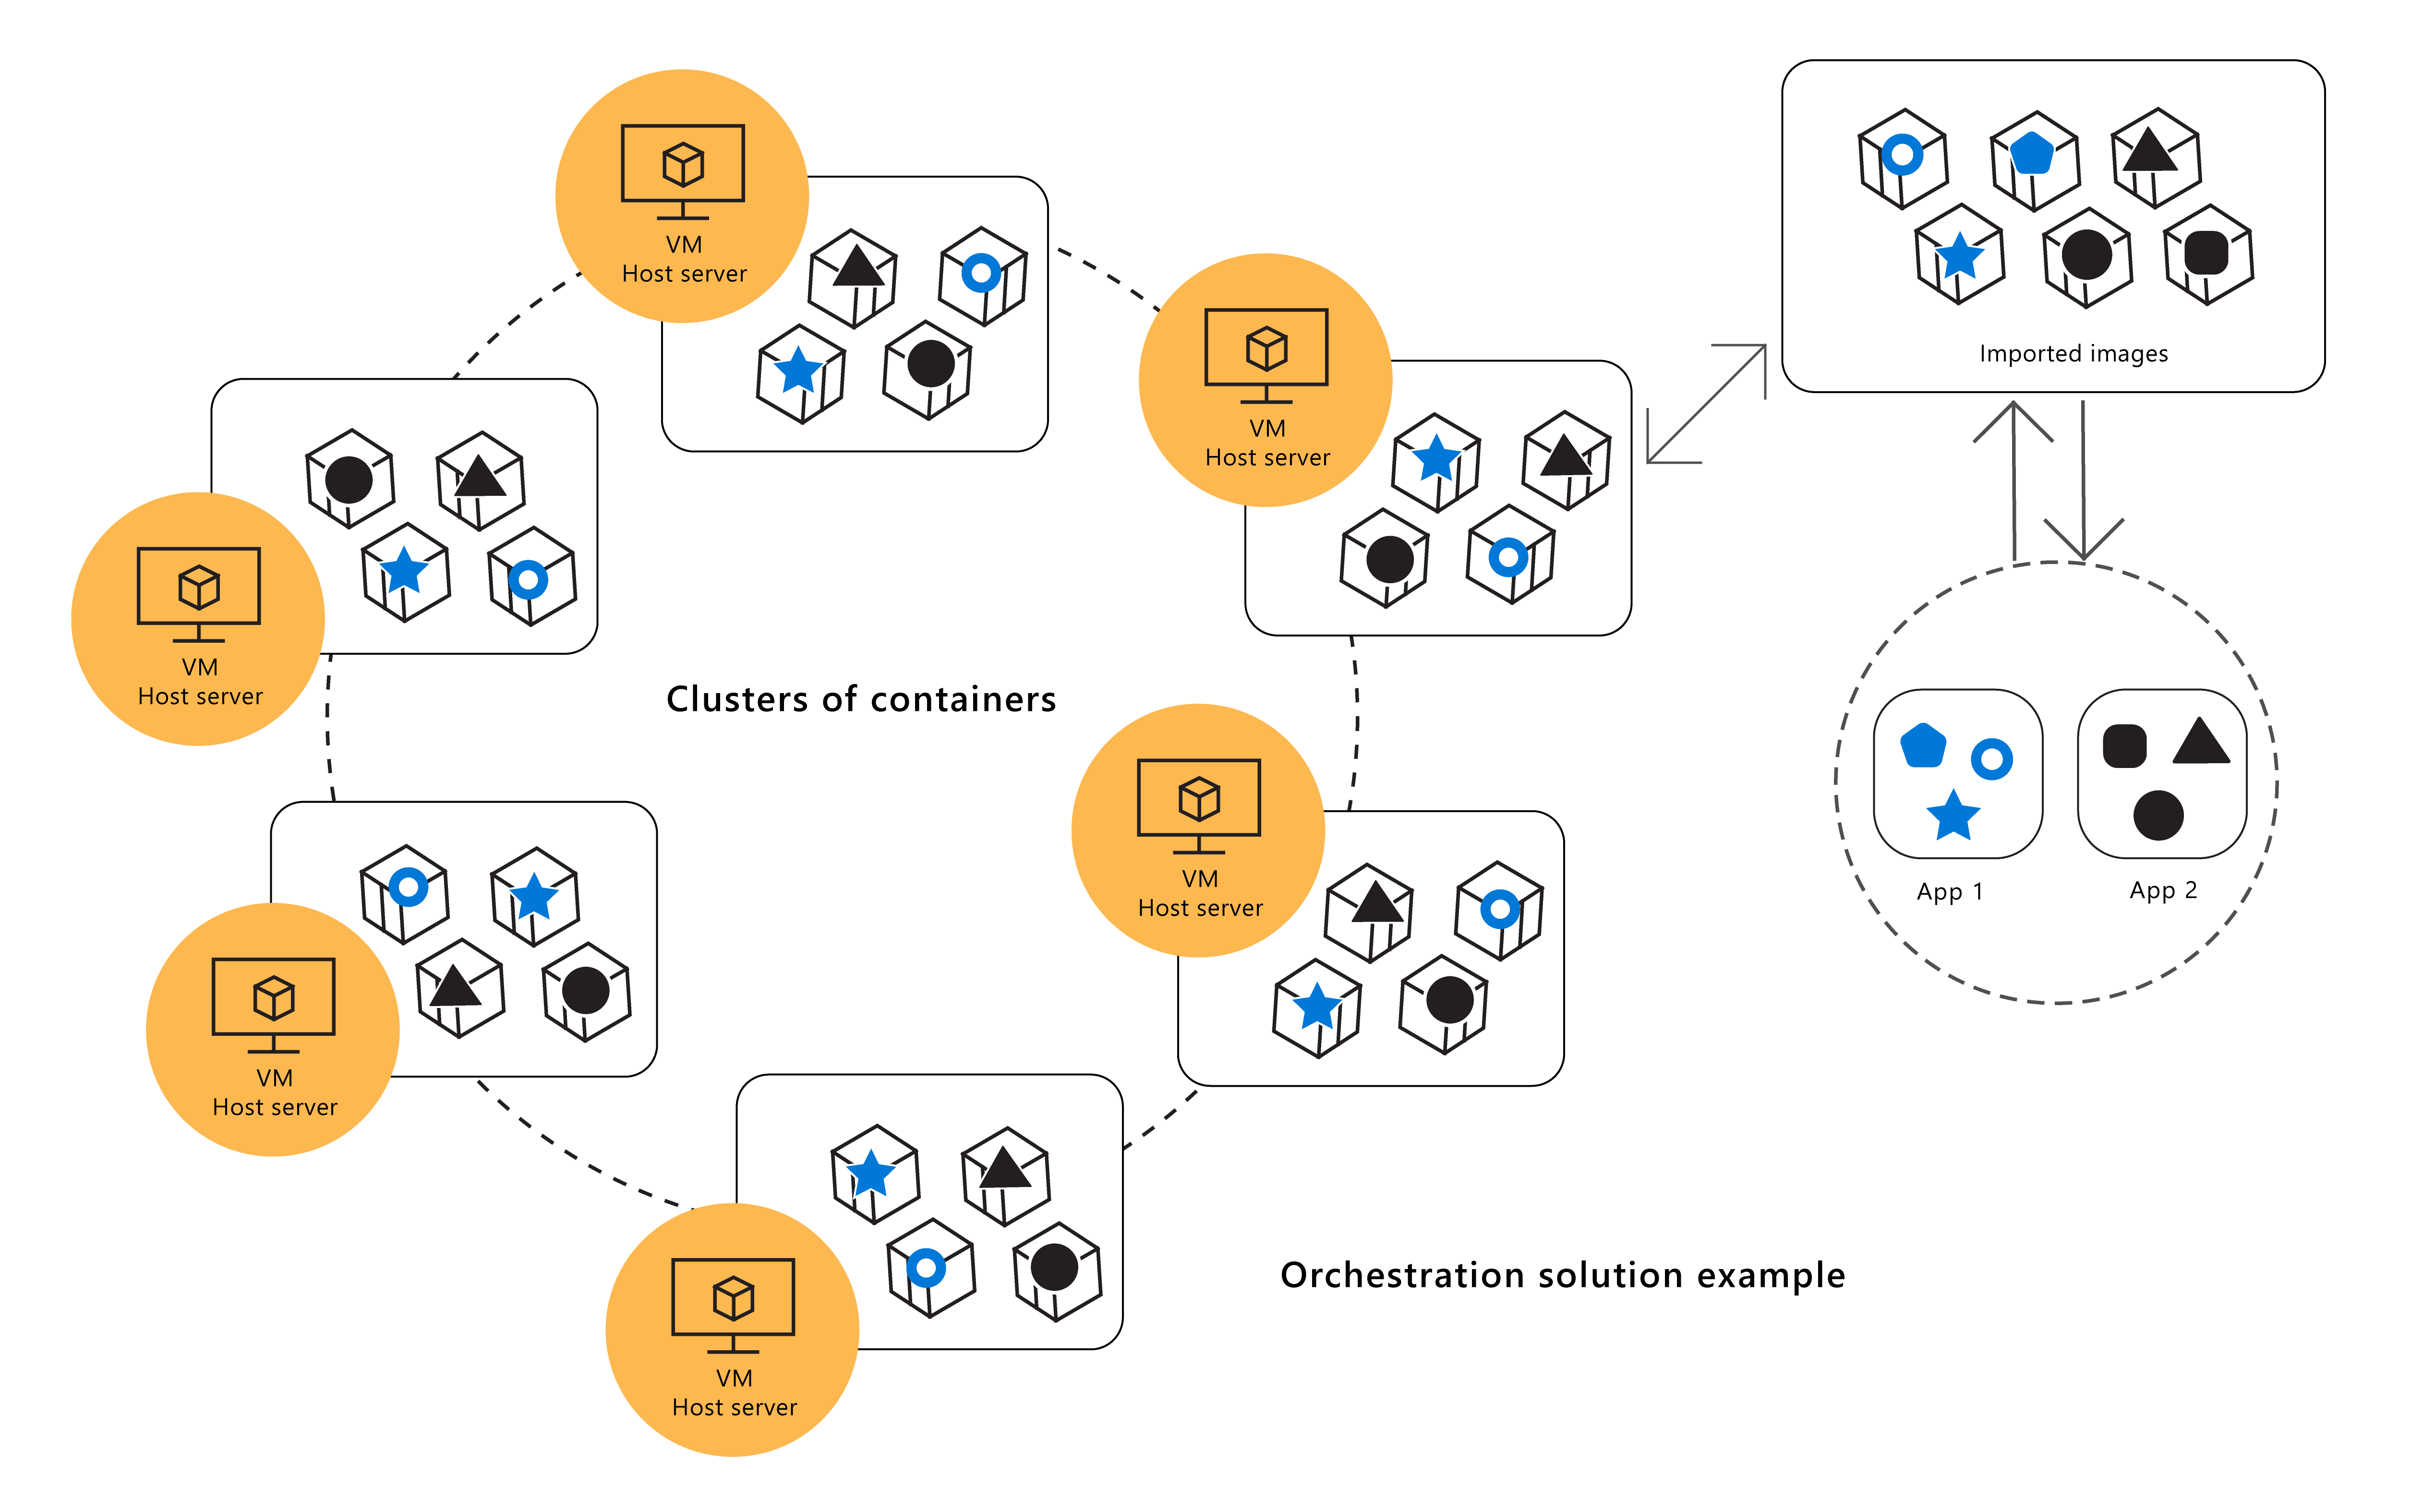 The components of a typical orchestration solution with representations for container images, a host server virtual machine, container images, containerized applications, container instances, and clusters of containers.